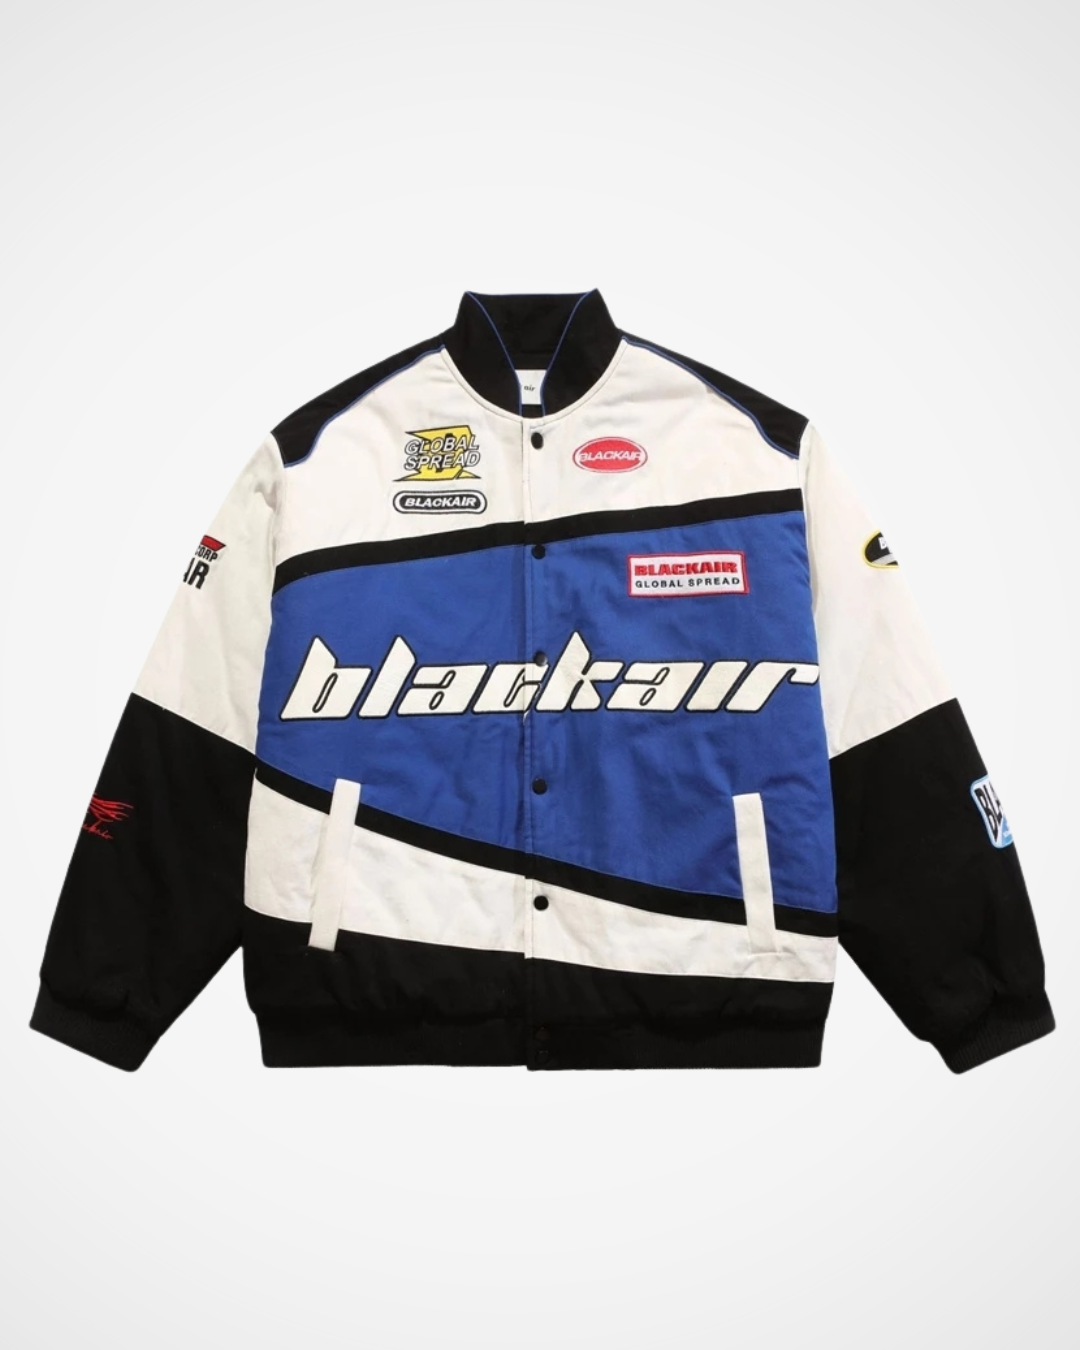 Copy of Choice Fast Racer Jacket